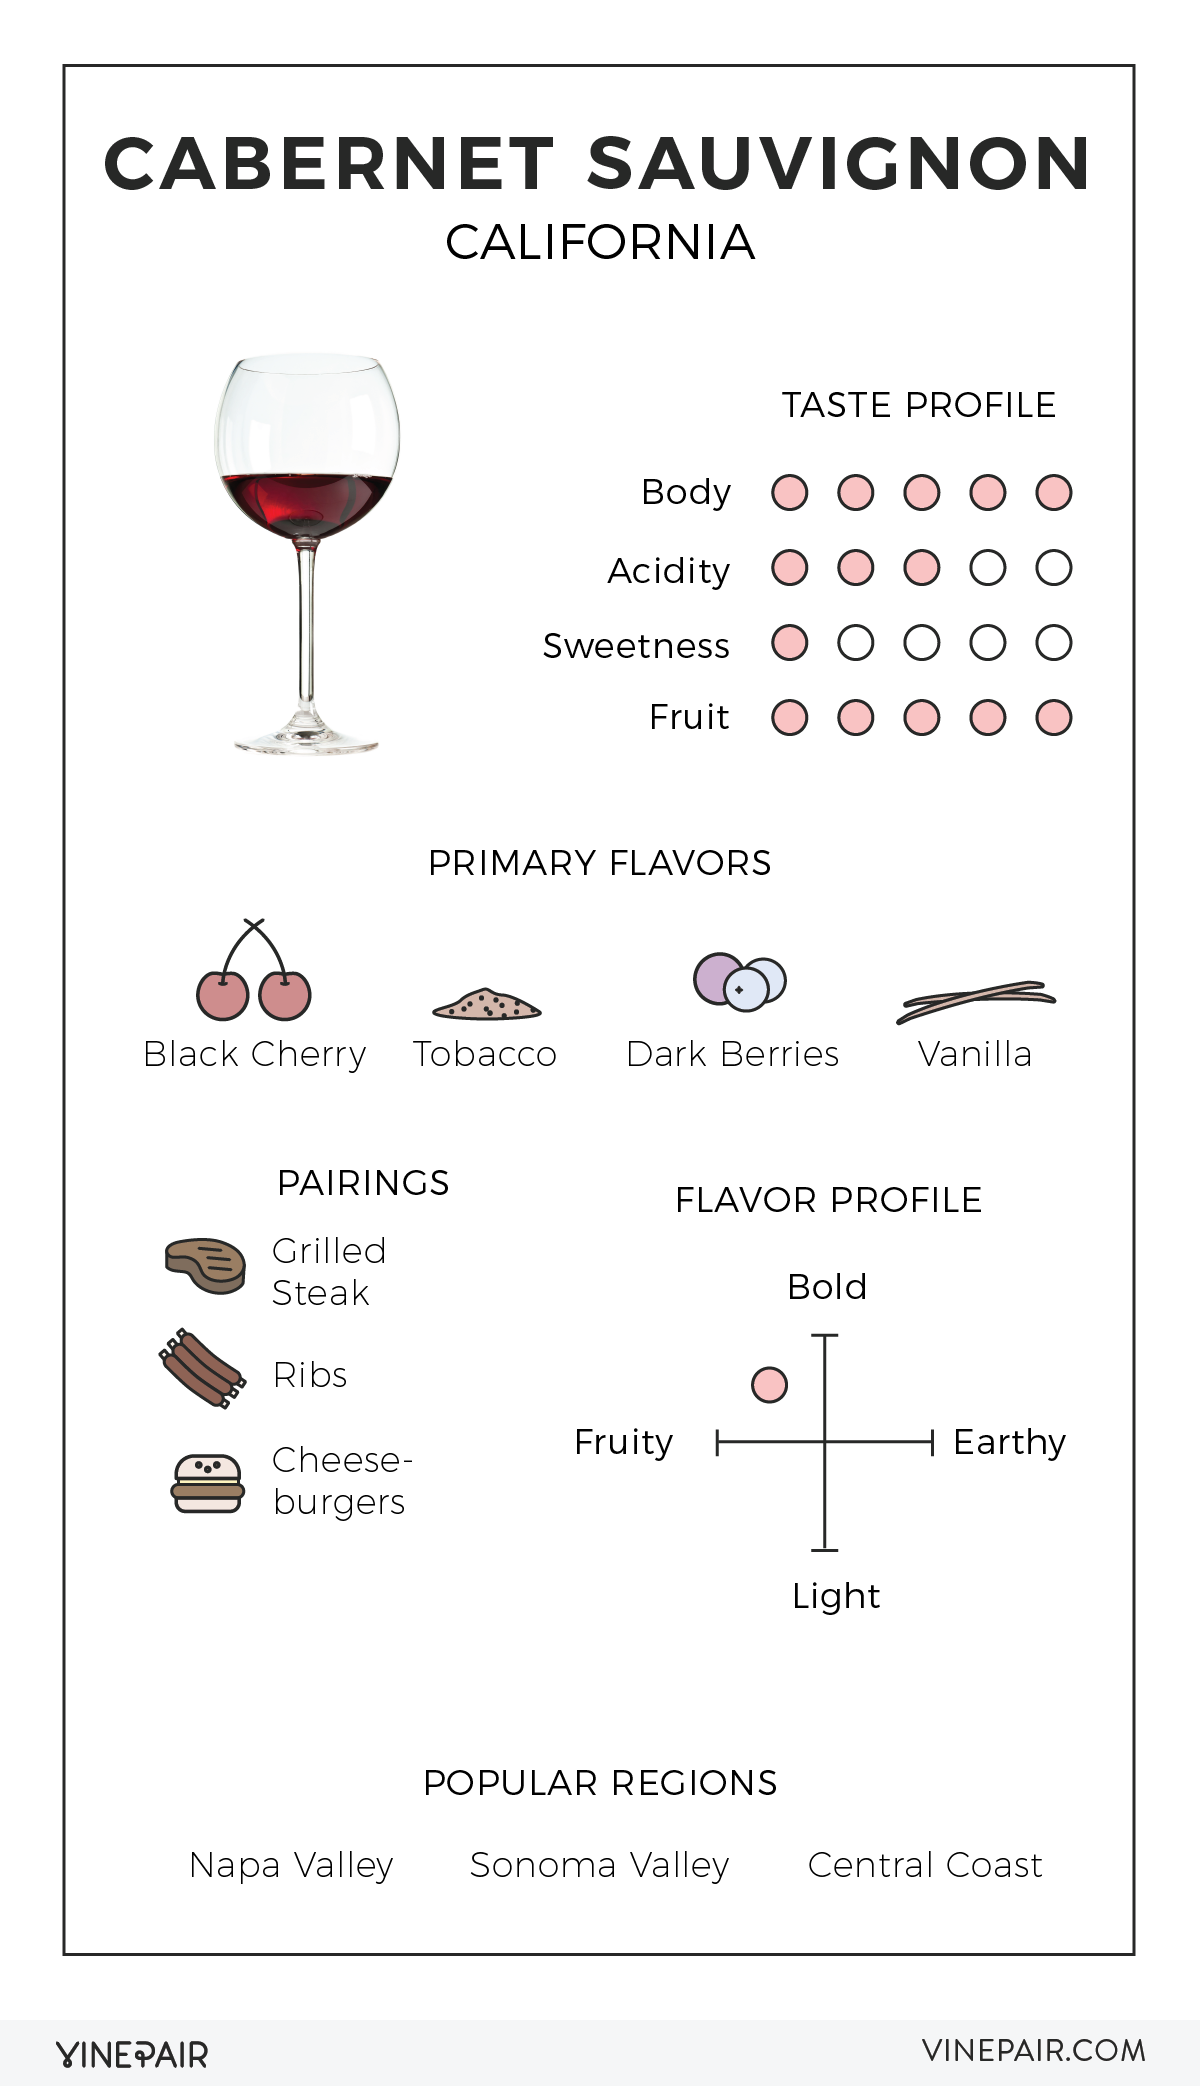 Read this illustrated guide to Cabernet Sauvignon from California